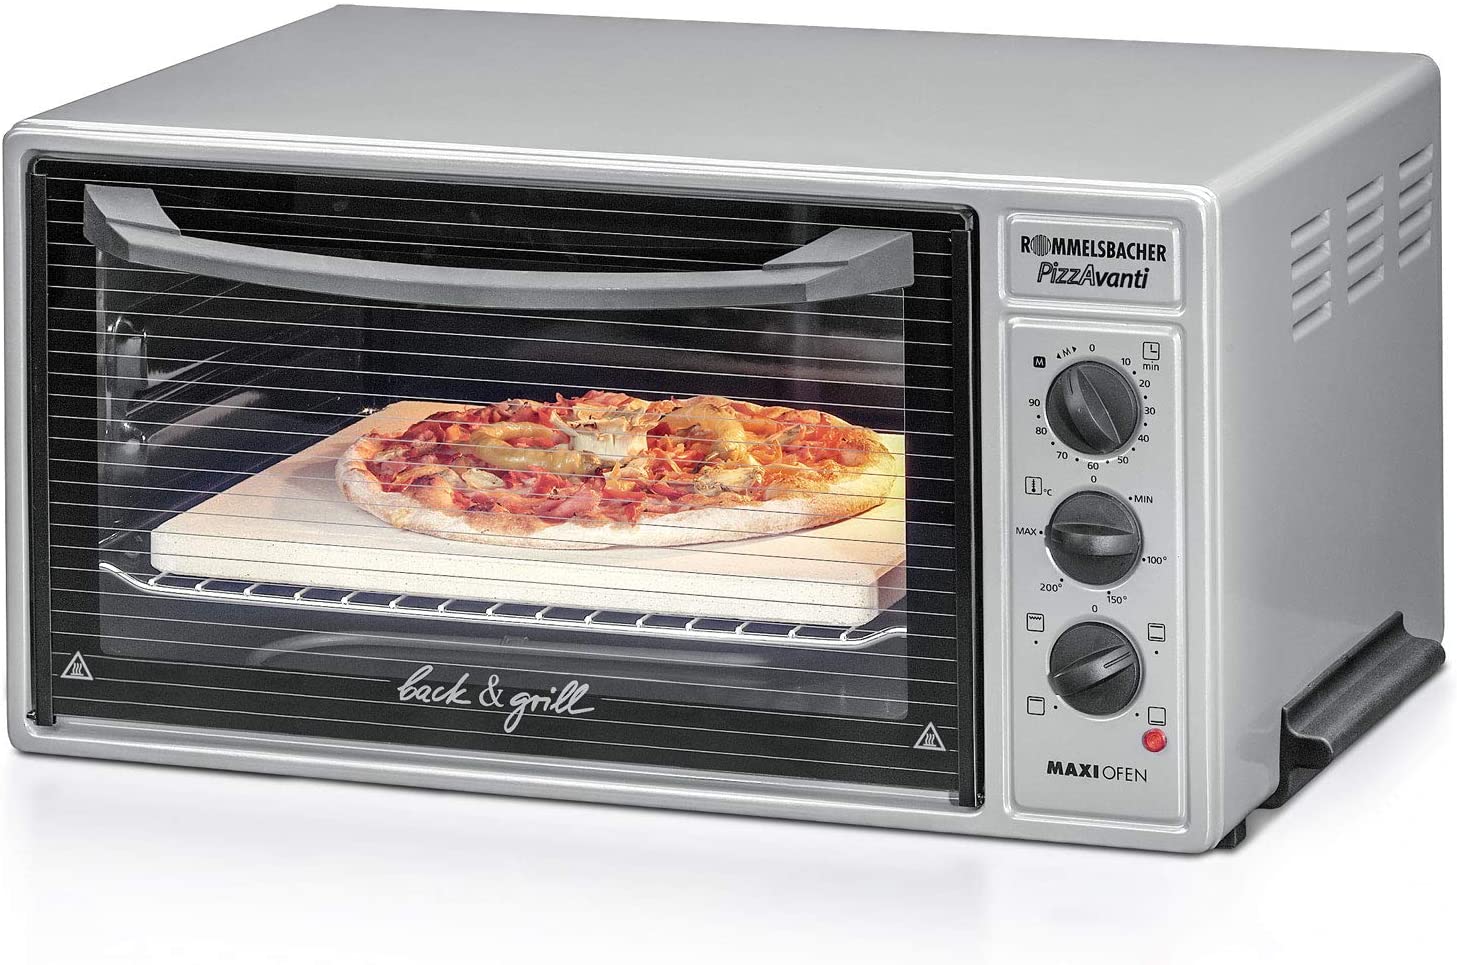 ROMMELSBACHER Maxi Oven BG 1600 - 40 Litre Baking Chamber, Temperature from 60 - 250 °C, 4 Heat Types, 1600 Watt & Pizza / Bread Baking Stone Set PS 16 - Stone Made of Natural Fireclay 35 x 35 cm, Includes Wooden Shovel